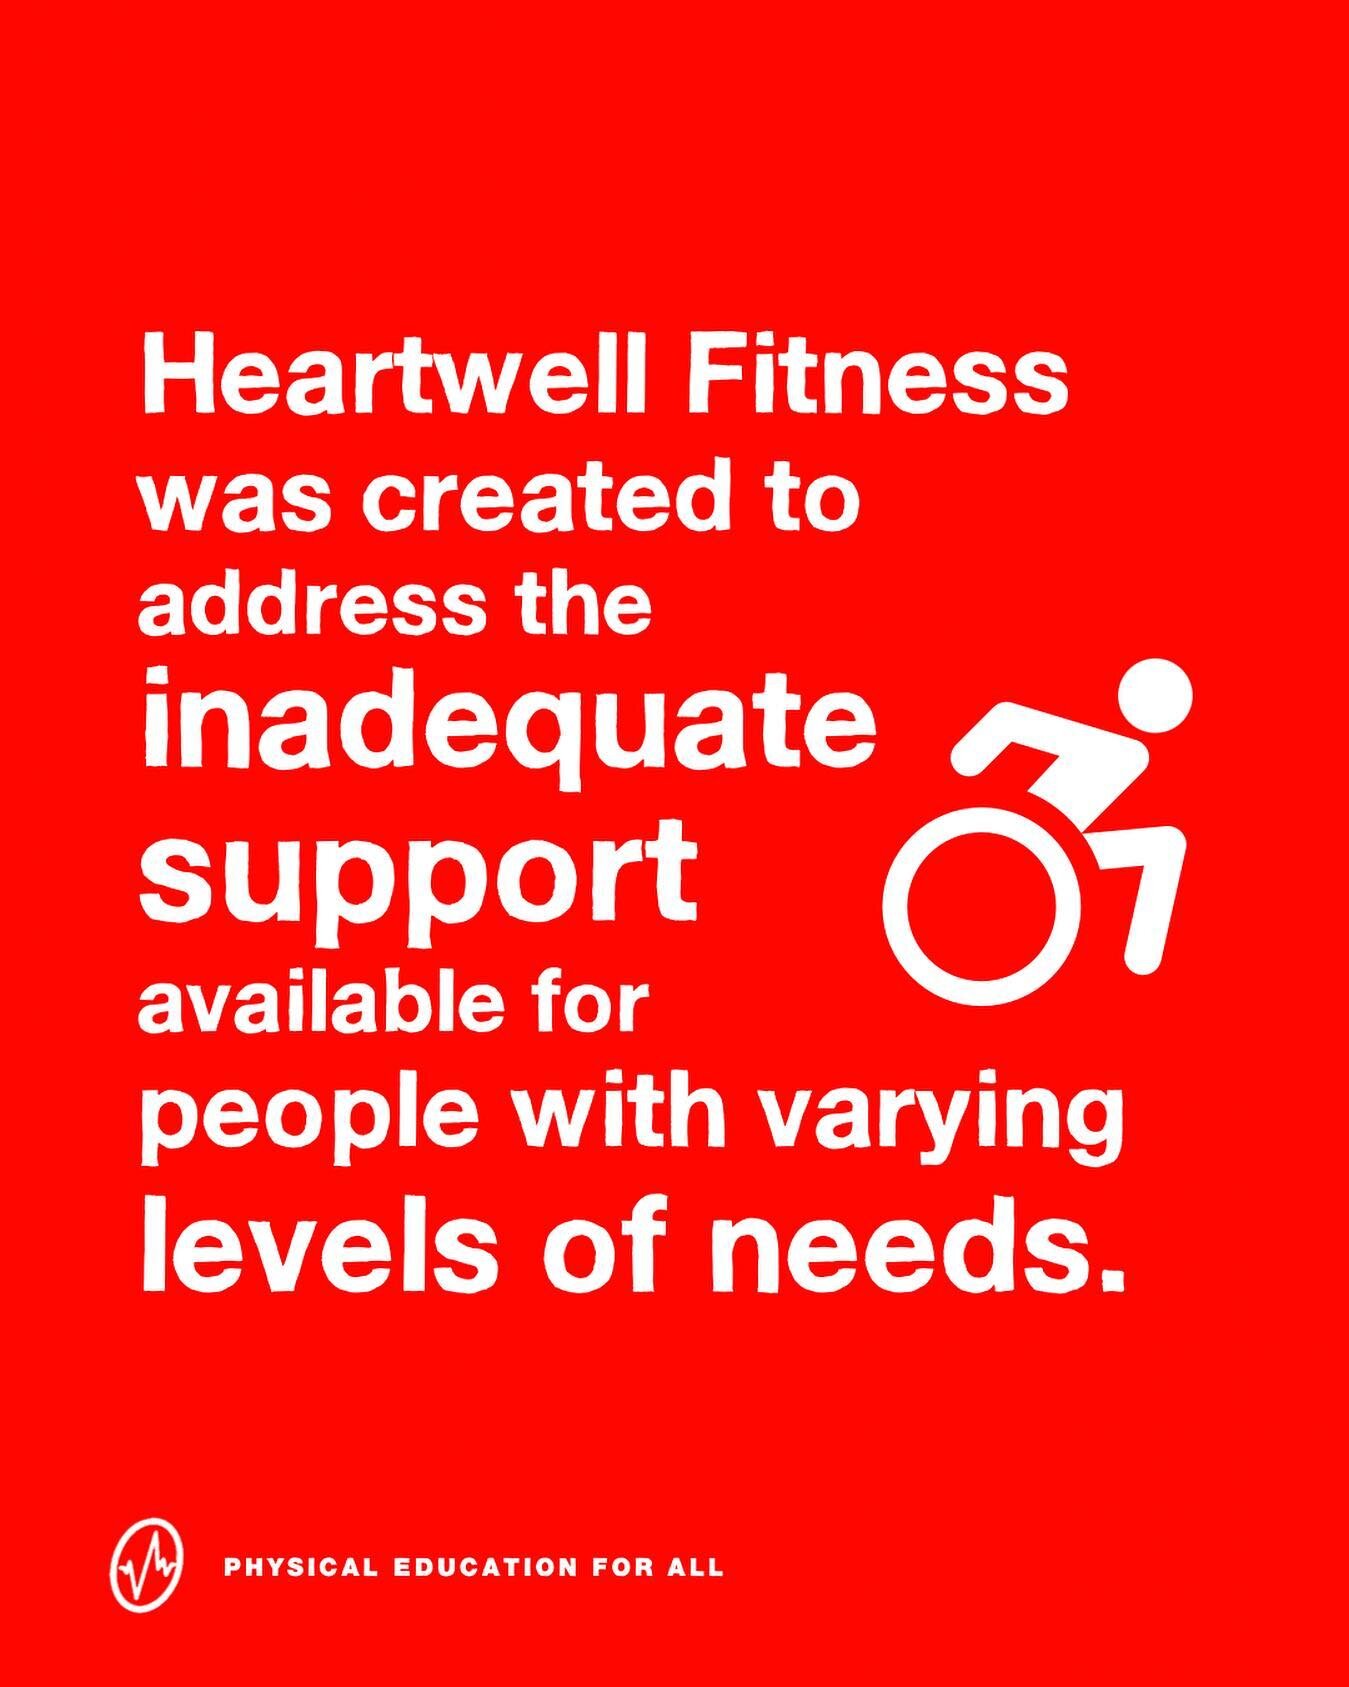 Before the implementation of the national disability insurance scheme (@ndis_australia), Heartwell Fitness witnessed the way many Australians were being left behind and tried to do something about it.

#PhysicalEducationForAll 

Image description:
&l